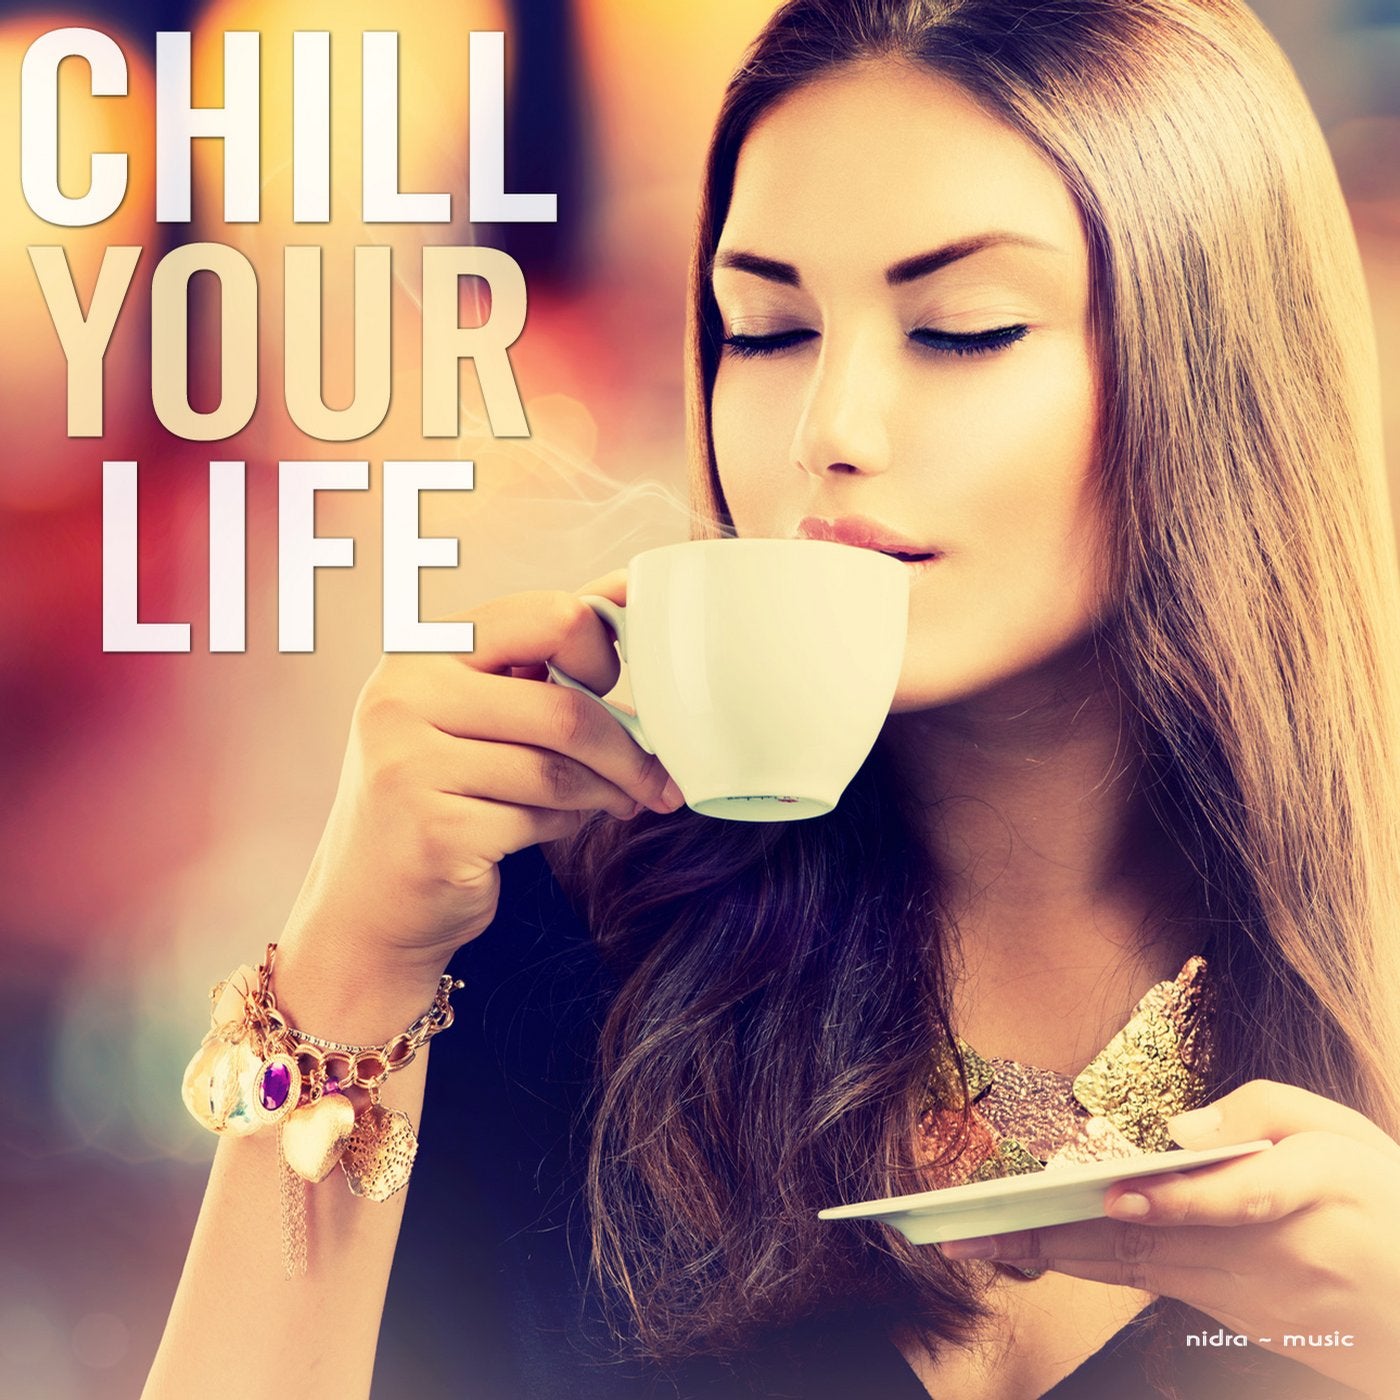 Chill Your Life